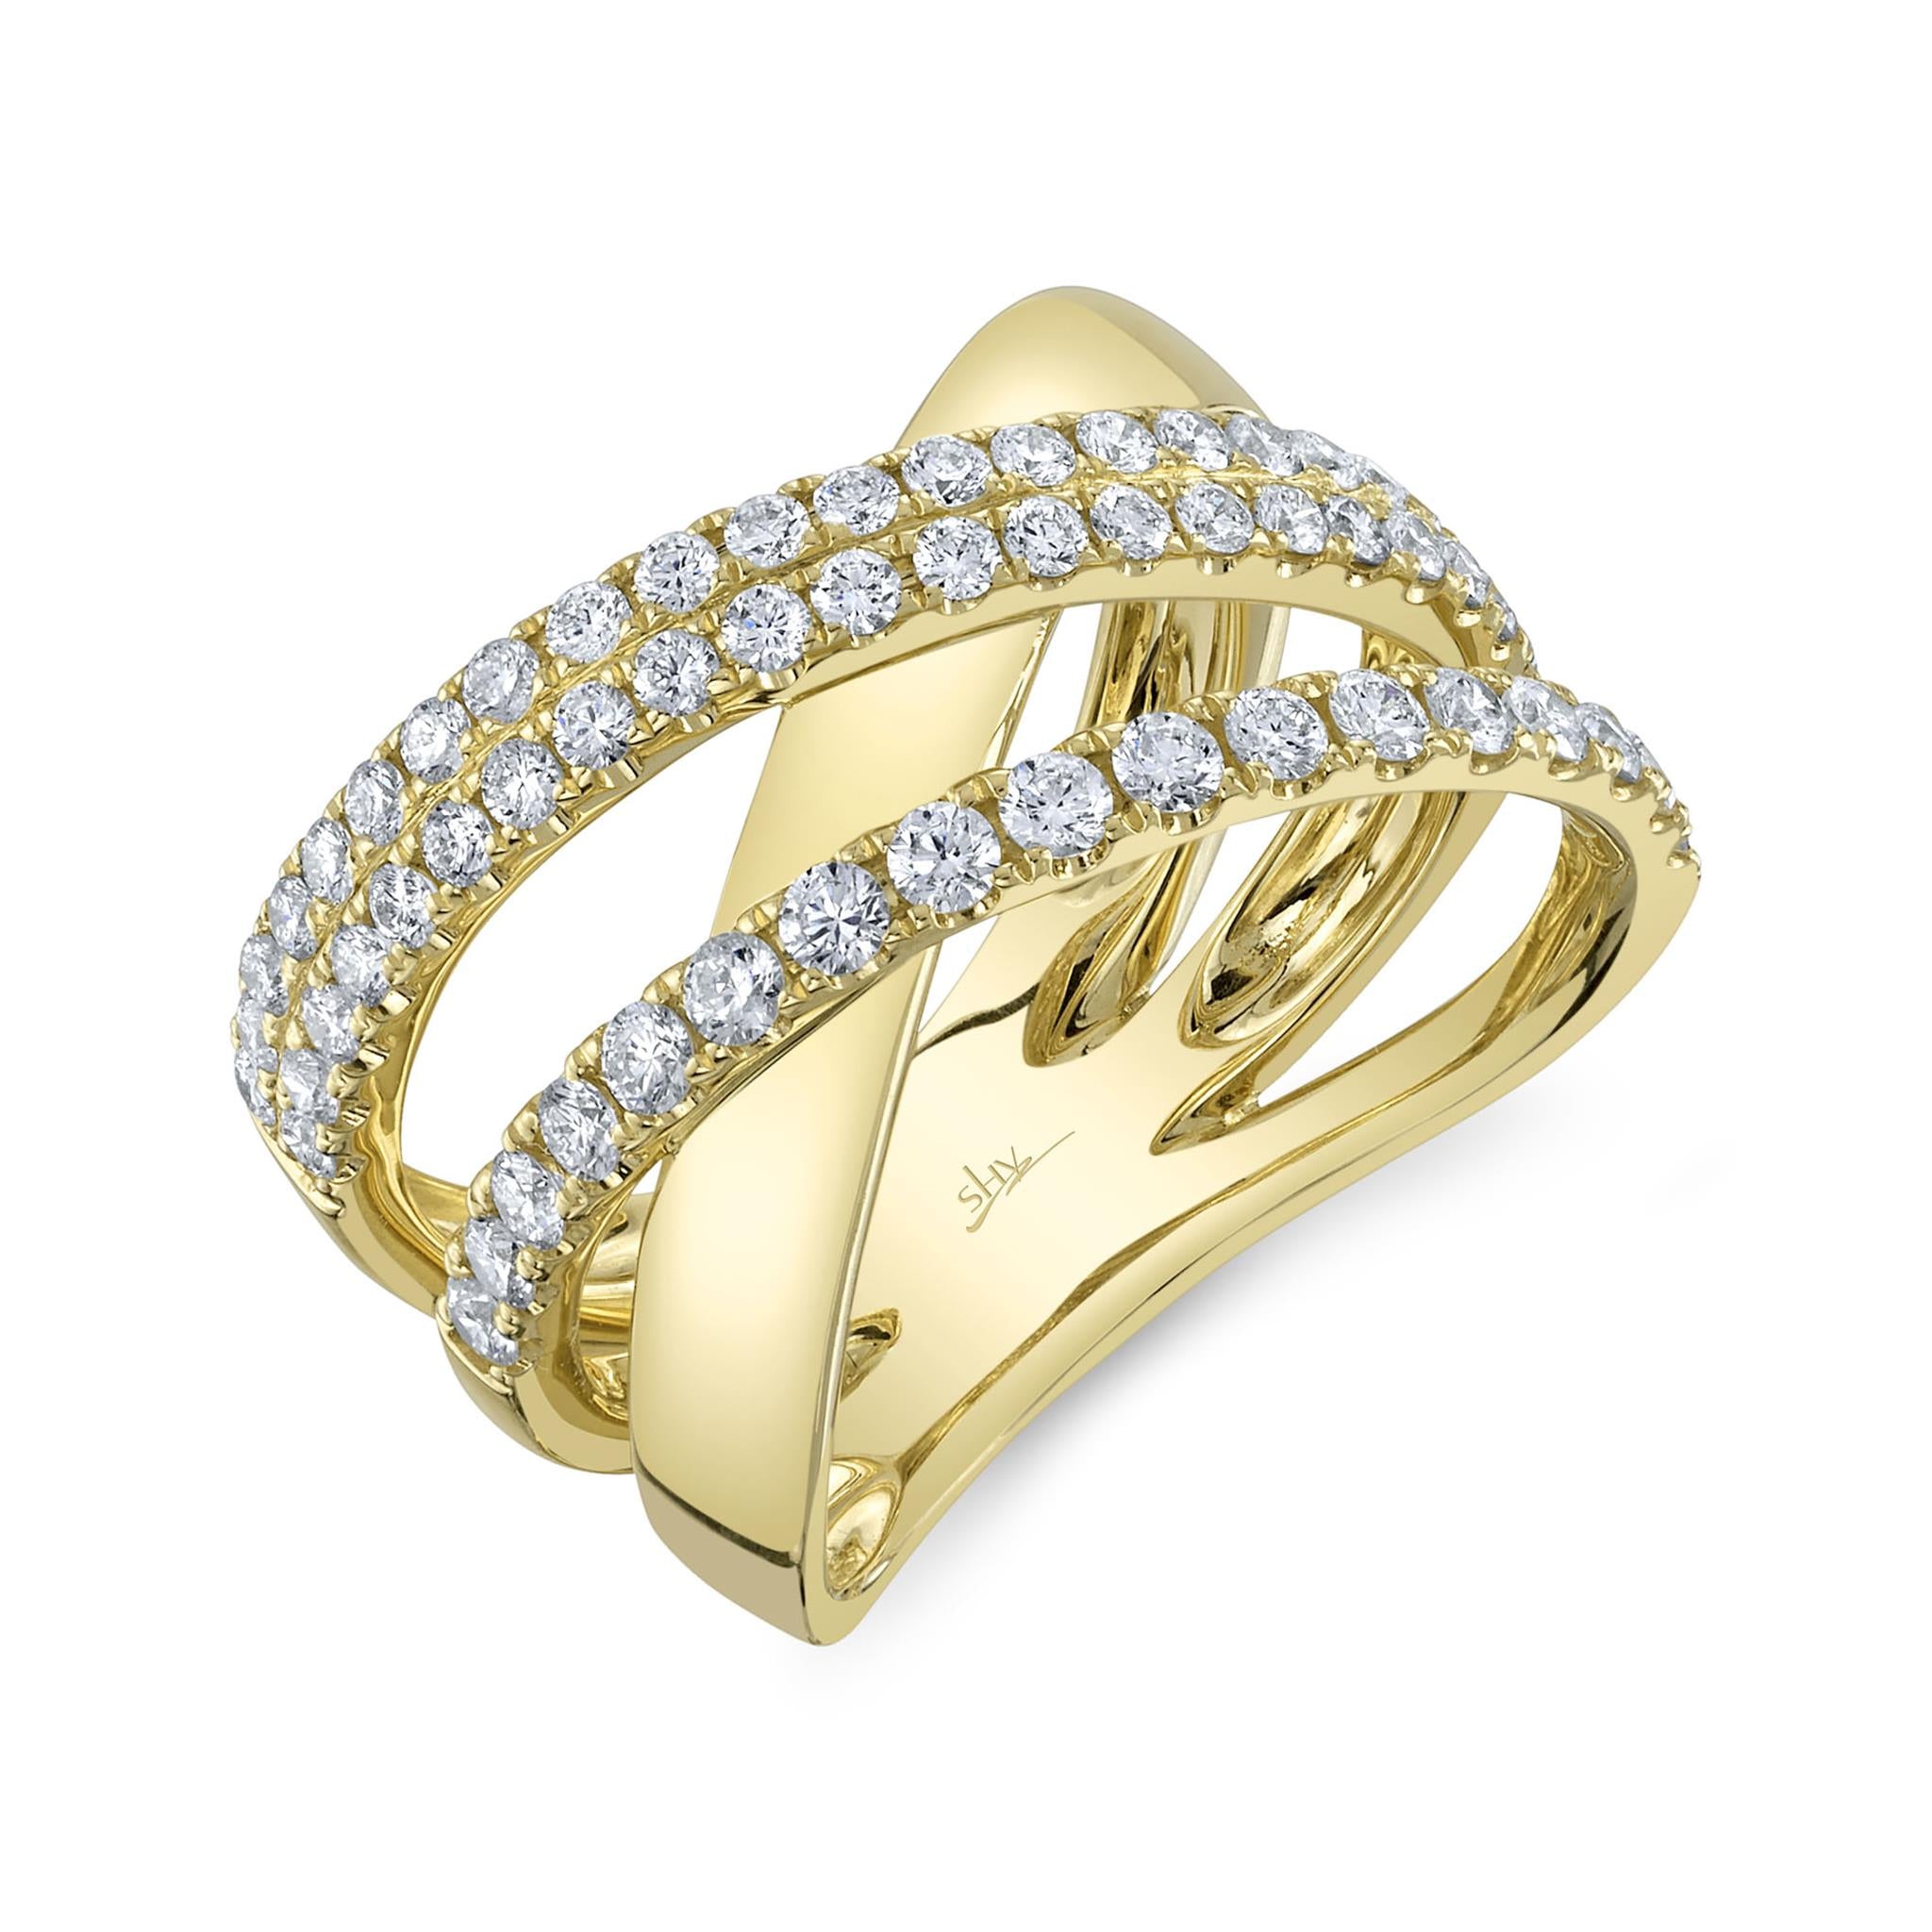 Shy Creation 14K Yellow Gold Bridge Ring with 1.01cttw Natural Diamonds